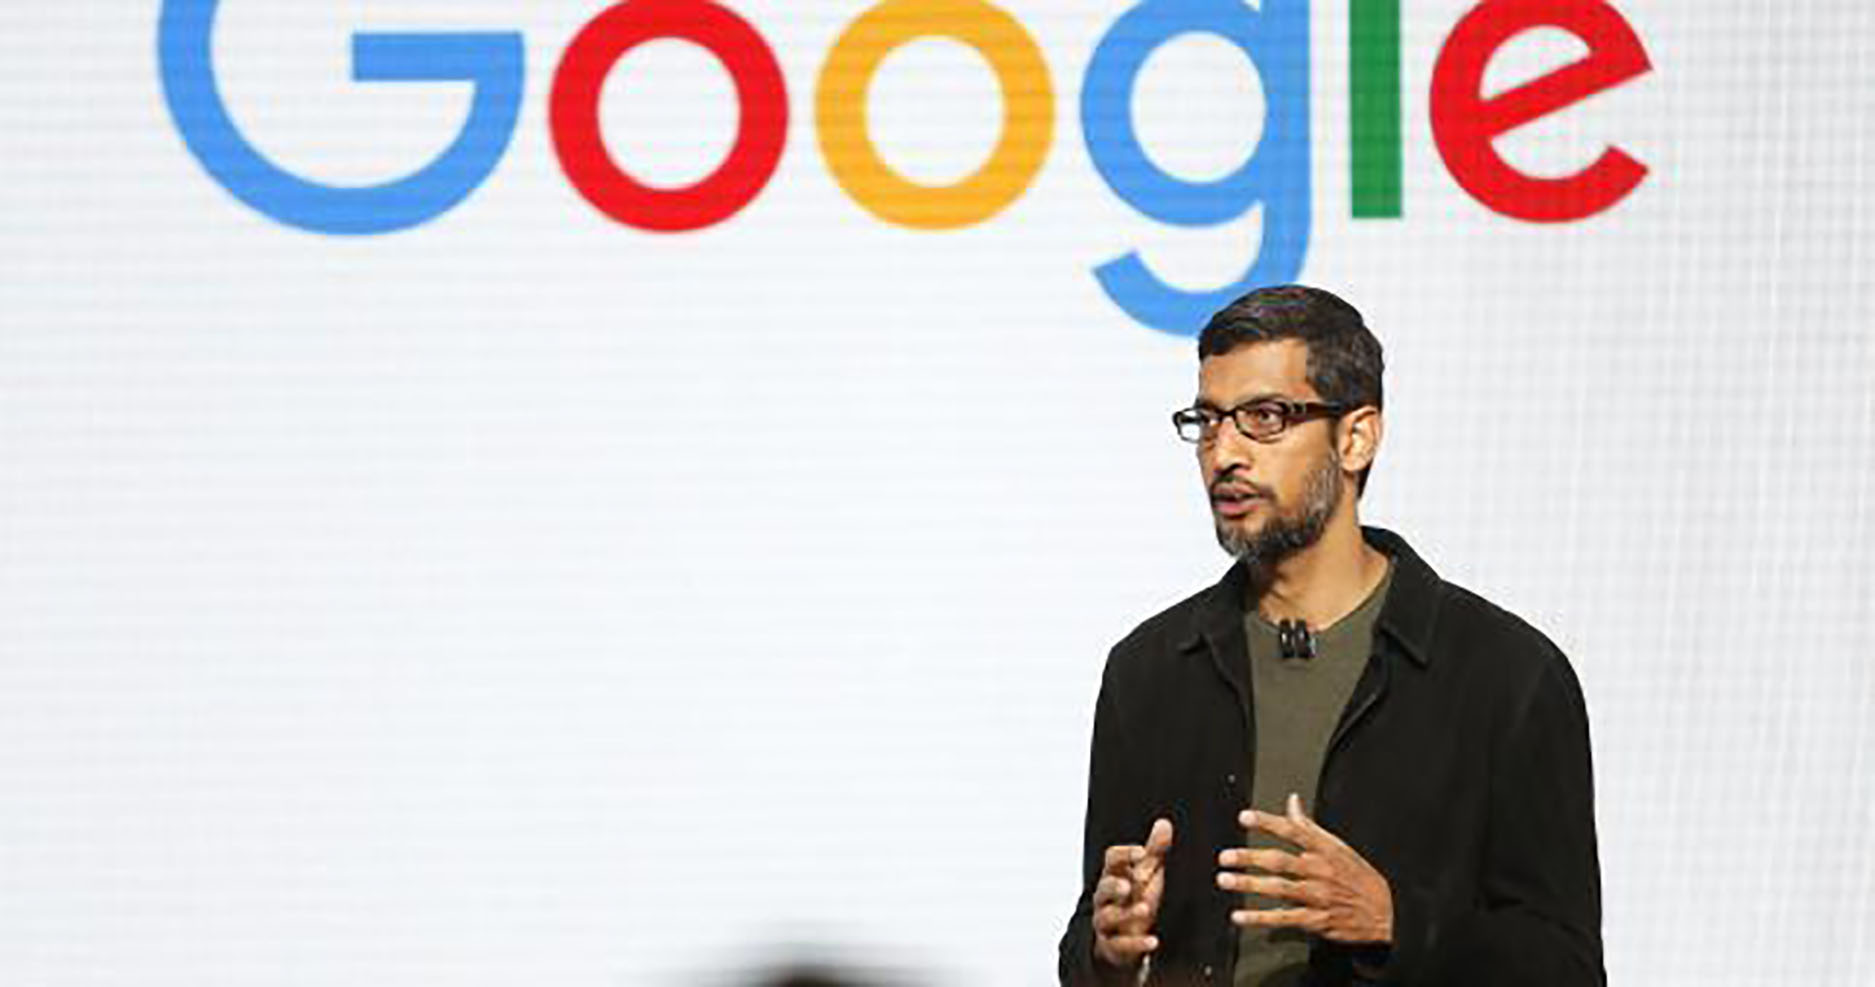 Google asks employees to delete China search engine memo